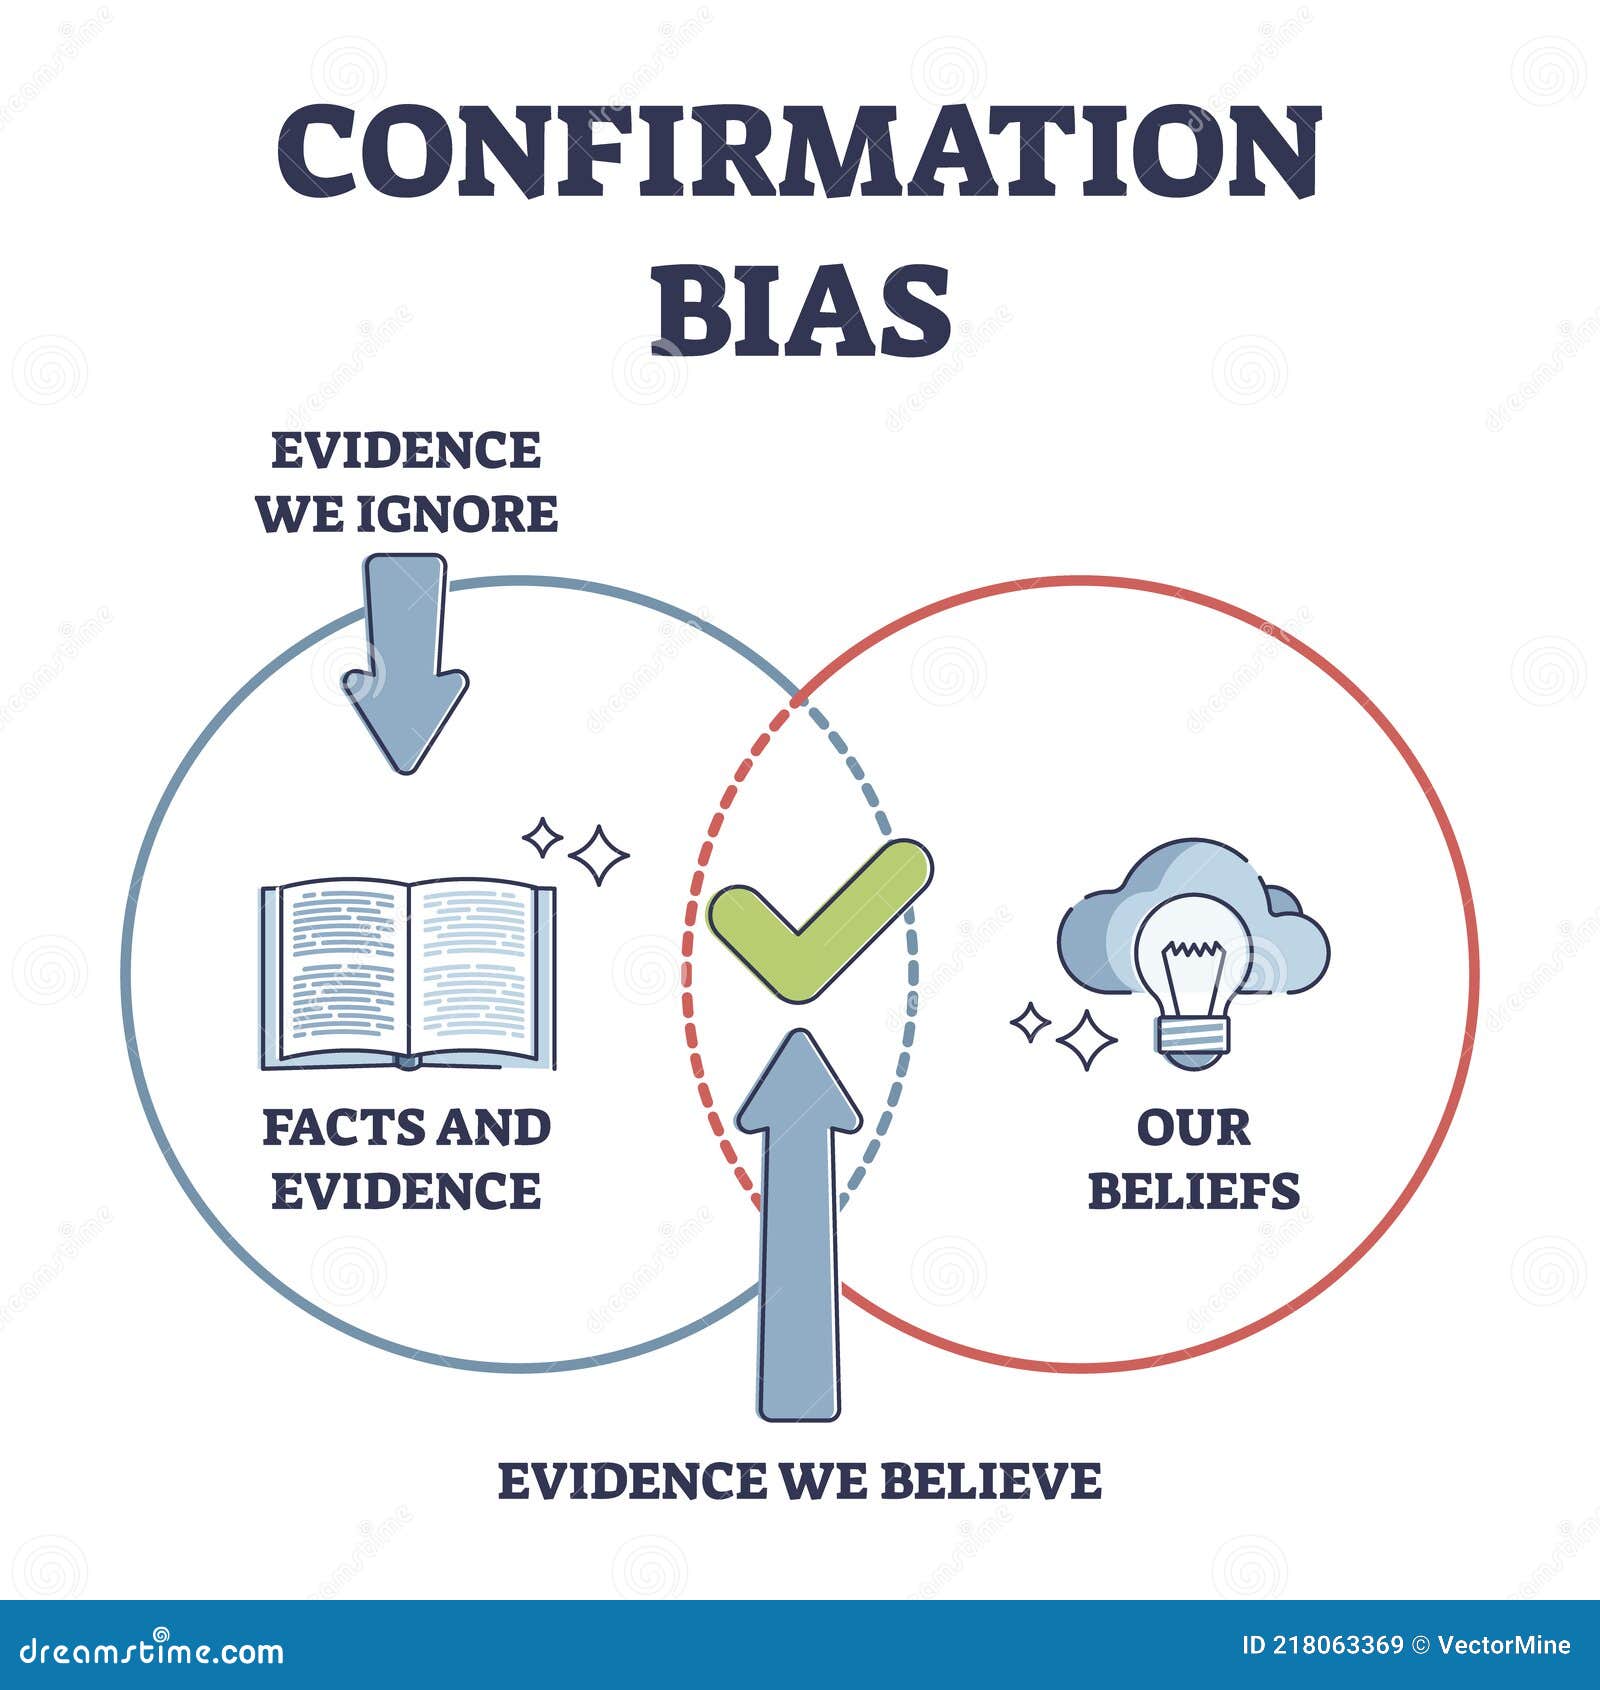 confirmation bias as psychological objective attitude issue outline diagram